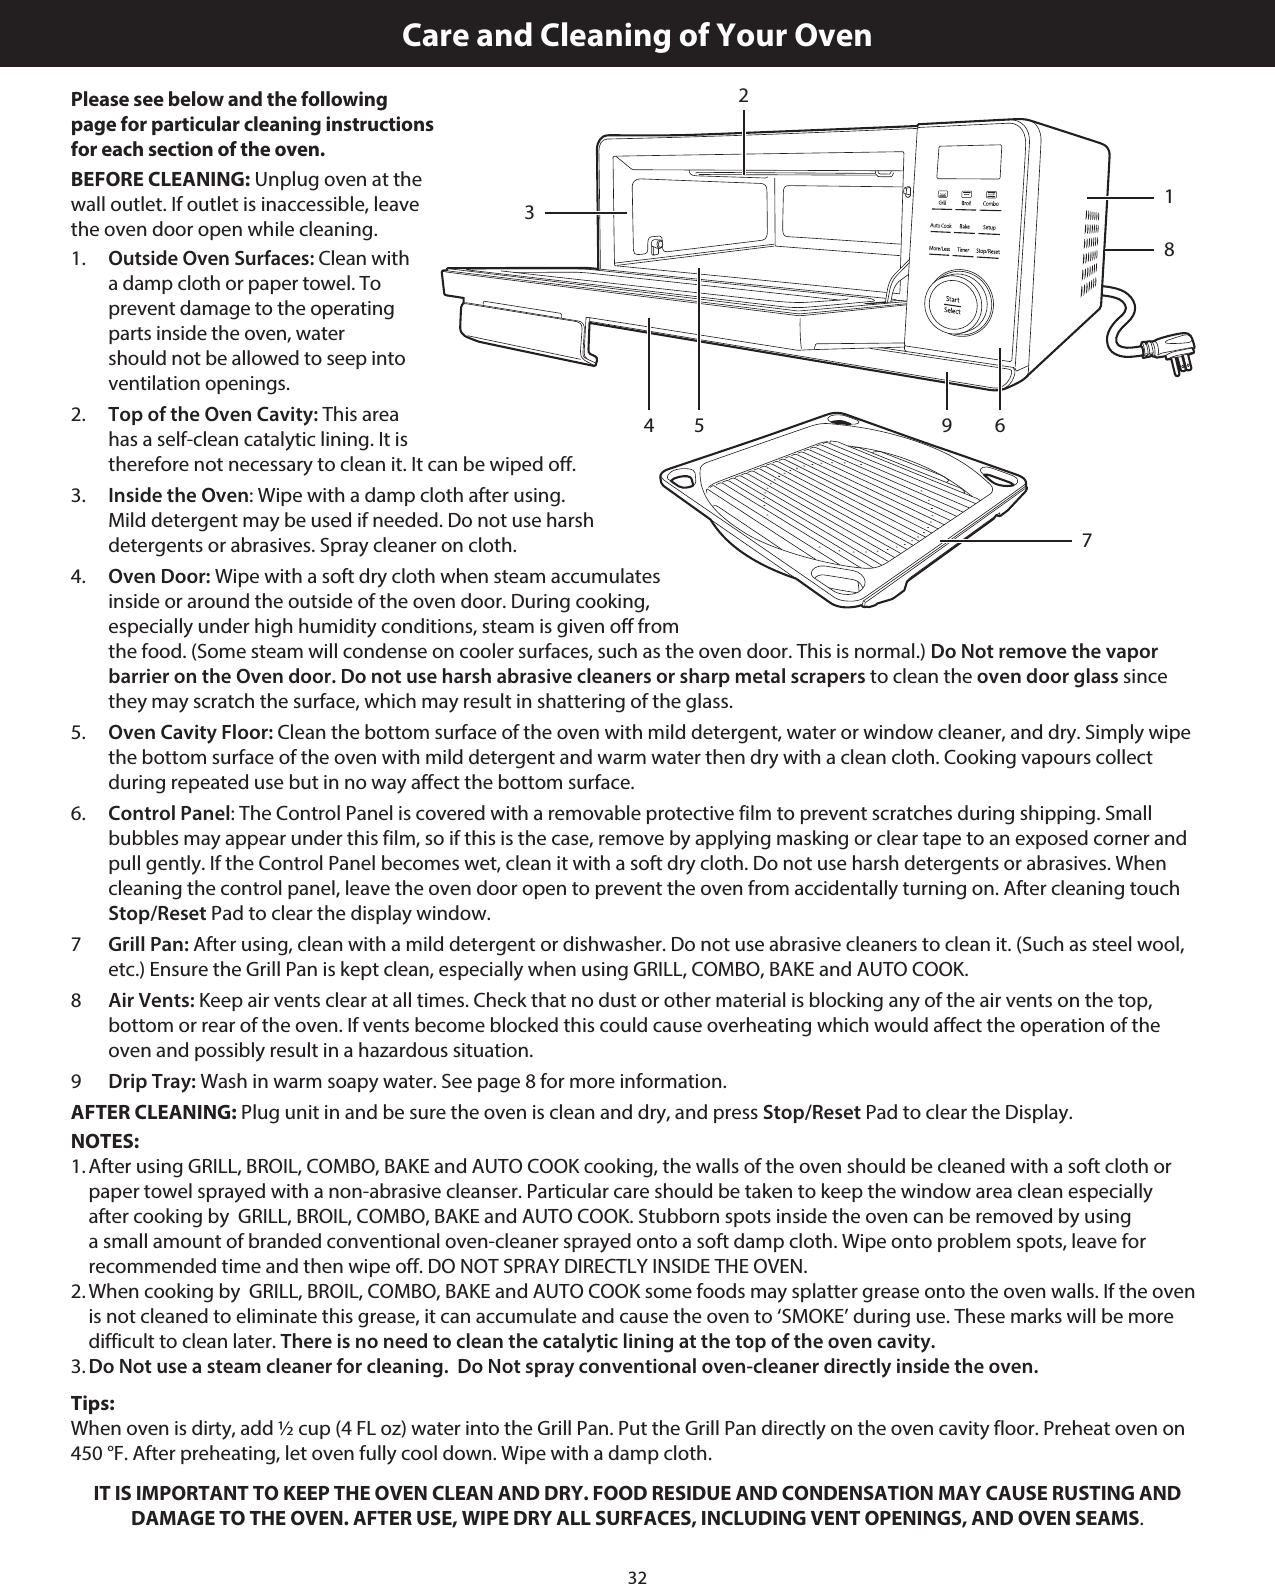 32Care and Cleaning of Your OvenPlease see below and the following page for particular cleaning instructions for each section of the oven.BEFORE CLEANING: Unplug oven at the wall outlet. If outlet is inaccessible, leave the oven door open while cleaning.1.  Outside Oven Surfaces: Clean with a damp cloth or paper towel. To prevent damage to the operating parts inside the oven, water should not be allowed to seep into ventilation openings.2.  Top of the Oven Cavity: This area has a self-clean catalytic lining. It is therefore not necessary to clean it. It can be wiped off.3.  Inside the Oven: Wipe with a damp cloth after using. Mild detergent may be used if needed. Do not use harsh detergents or abrasives. Spray cleaner on cloth.4.  Oven Door: Wipe with a soft dry cloth when steam accumulates  inside or around the outside of the oven door. During cooking,  especially under high humidity conditions, steam is given off from  the food. (Some steam will condense on cooler surfaces, such as the oven door. This is normal.) Do Not remove the vapor barrier on the Oven door. Do not use harsh abrasive cleaners or sharp metal scrapers to clean the oven door glass since they may scratch the surface, which may result in shattering of the glass.5.  Oven Cavity Floor: Clean the bottom surface of the oven with mild detergent, water or window cleaner, and dry. Simply wipe the bottom surface of the oven with mild detergent and warm water then dry with a clean cloth. Cooking vapours collect during repeated use but in no way affect the bottom surface.6.  Control Panel: The Control Panel is covered with a removable protective film to prevent scratches during shipping. Small bubbles may appear under this film, so if this is the case, remove by applying masking or clear tape to an exposed corner and pull gently. If the Control Panel becomes wet, clean it with a soft dry cloth. Do not use harsh detergents or abrasives. When cleaning the control panel, leave the oven door open to prevent the oven from accidentally turning on. After cleaning touch Stop/Reset Pad to clear the display window.7  Grill Pan: After using, clean with a mild detergent or dishwasher. Do not use abrasive cleaners to clean it. (Such as steel wool, etc.) Ensure the Grill Pan is kept clean, especially when using GRILL, COMBO, BAKE and AUTO COOK.8  Air Vents: Keep air vents clear at all times. Check that no dust or other material is blocking any of the air vents on the top, bottom or rear of the oven. If vents become blocked this could cause overheating which would affect the operation of the oven and possibly result in a hazardous situation.9  Drip Tray: Wash in warm soapy water. See page 8 for more information.AFTER CLEANING: Plug unit in and be sure the oven is clean and dry, and press Stop/Reset Pad to clear the Display.NOTES:1. After using GRILL, BROIL, COMBO, BAKE and AUTO COOK cooking, the walls of the oven should be cleaned with a soft cloth or paper towel sprayed with a non-abrasive cleanser. Particular care should be taken to keep the window area clean especially after cooking by  GRILL, BROIL, COMBO, BAKE and AUTO COOK. Stubborn spots inside the oven can be removed by using a small amount of branded conventional oven-cleaner sprayed onto a soft damp cloth. Wipe onto problem spots, leave for recommended time and then wipe off. DO NOT SPRAY DIRECTLY INSIDE THE OVEN.2. When cooking by  GRILL, BROIL, COMBO, BAKE and AUTO COOK some foods may splatter grease onto the oven walls. If the oven is not cleaned to eliminate this grease, it can accumulate and cause the oven to ‘SMOKE’ during use. These marks will be more difficult to clean later. There is no need to clean the catalytic lining at the top of the oven cavity.3. Do Not use a steam cleaner for cleaning.  Do Not spray conventional oven-cleaner directly inside the oven.Tips:When oven is dirty, add ½ cup (4 FL oz) water into the Grill Pan. Put the Grill Pan directly on the oven cavity floor. Preheat oven on 450 °F. After preheating, let oven fully cool down. Wipe with a damp cloth.IT IS IMPORTANT TO KEEP THE OVEN CLEAN AND DRY. FOOD RESIDUE AND CONDENSATION MAY CAUSE RUSTING AND DAMAGE TO THE OVEN. AFTER USE, WIPE DRY ALL SURFACES, INCLUDING VENT OPENINGS, AND OVEN SEAMS.314 5 62897